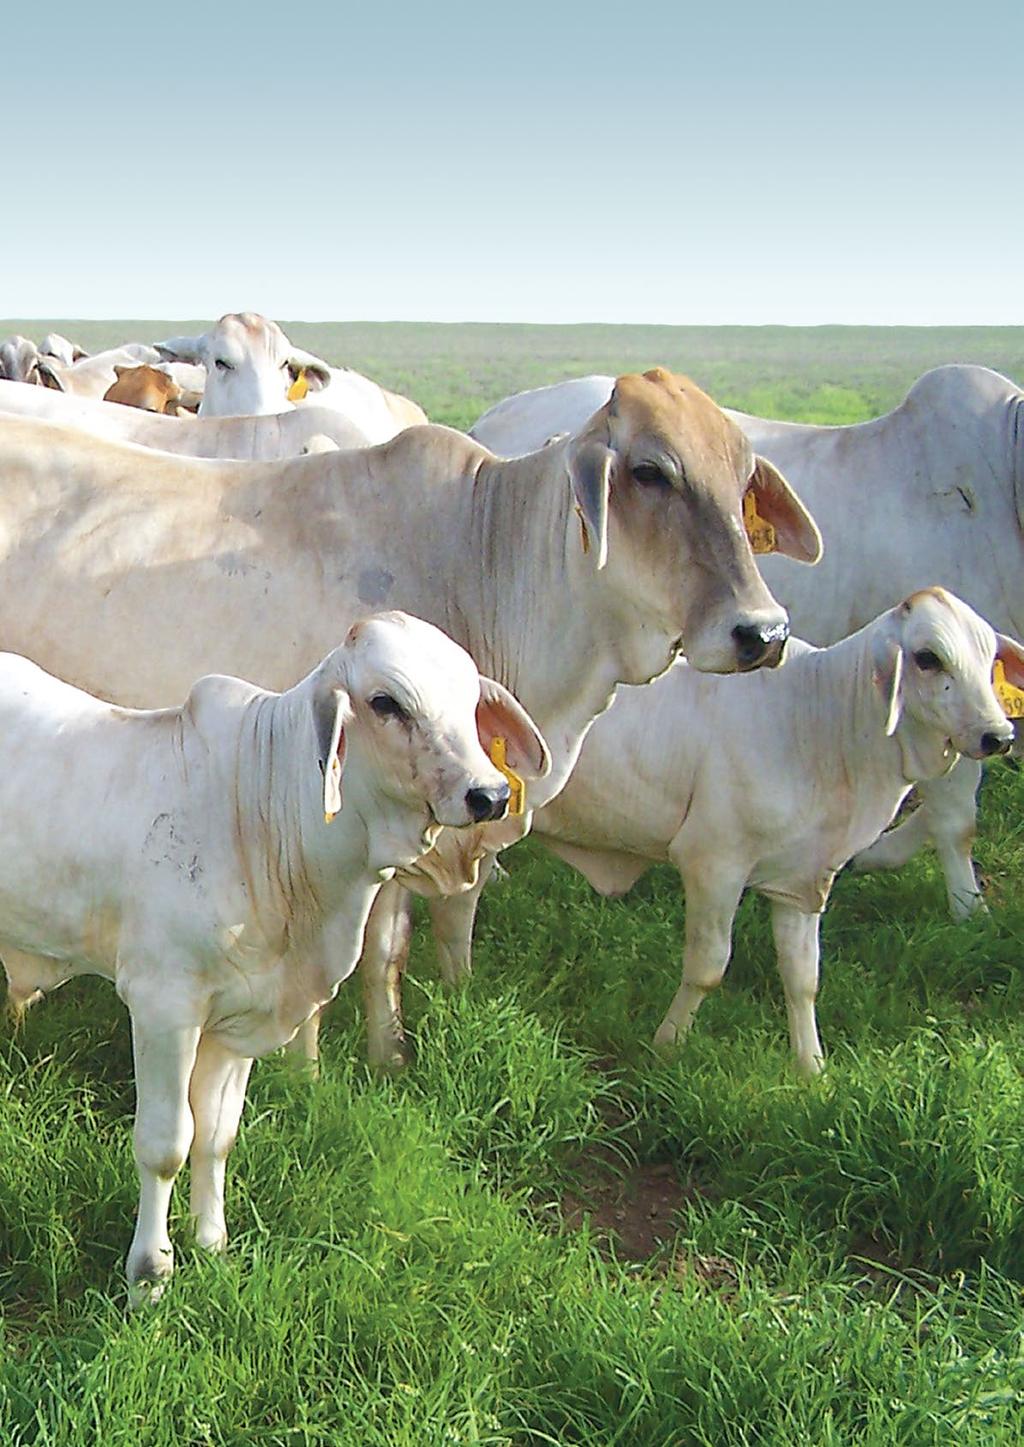 NATIONAL FEEDLOT ACCREDITATION SCHEME A feedlot is an intensive production system where the cattle are fed a prepared feed ration for a specific length of time depending on the final customer